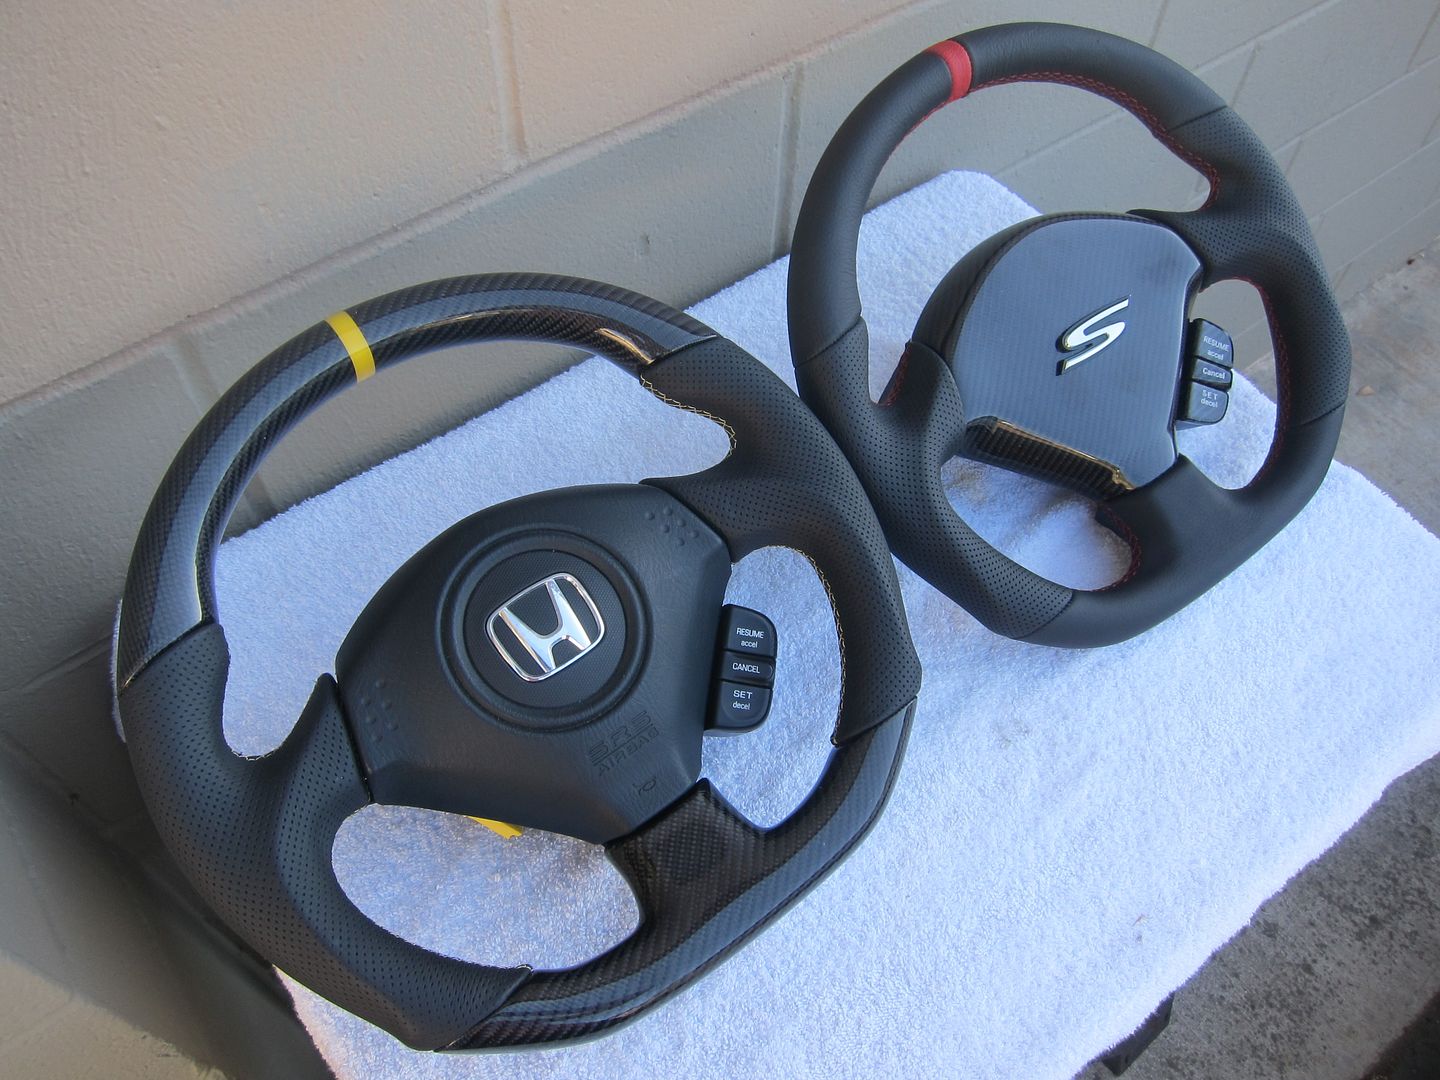 Offering Honda S2000 Upgraded Steering Wheels For Nsx Owners Who Want